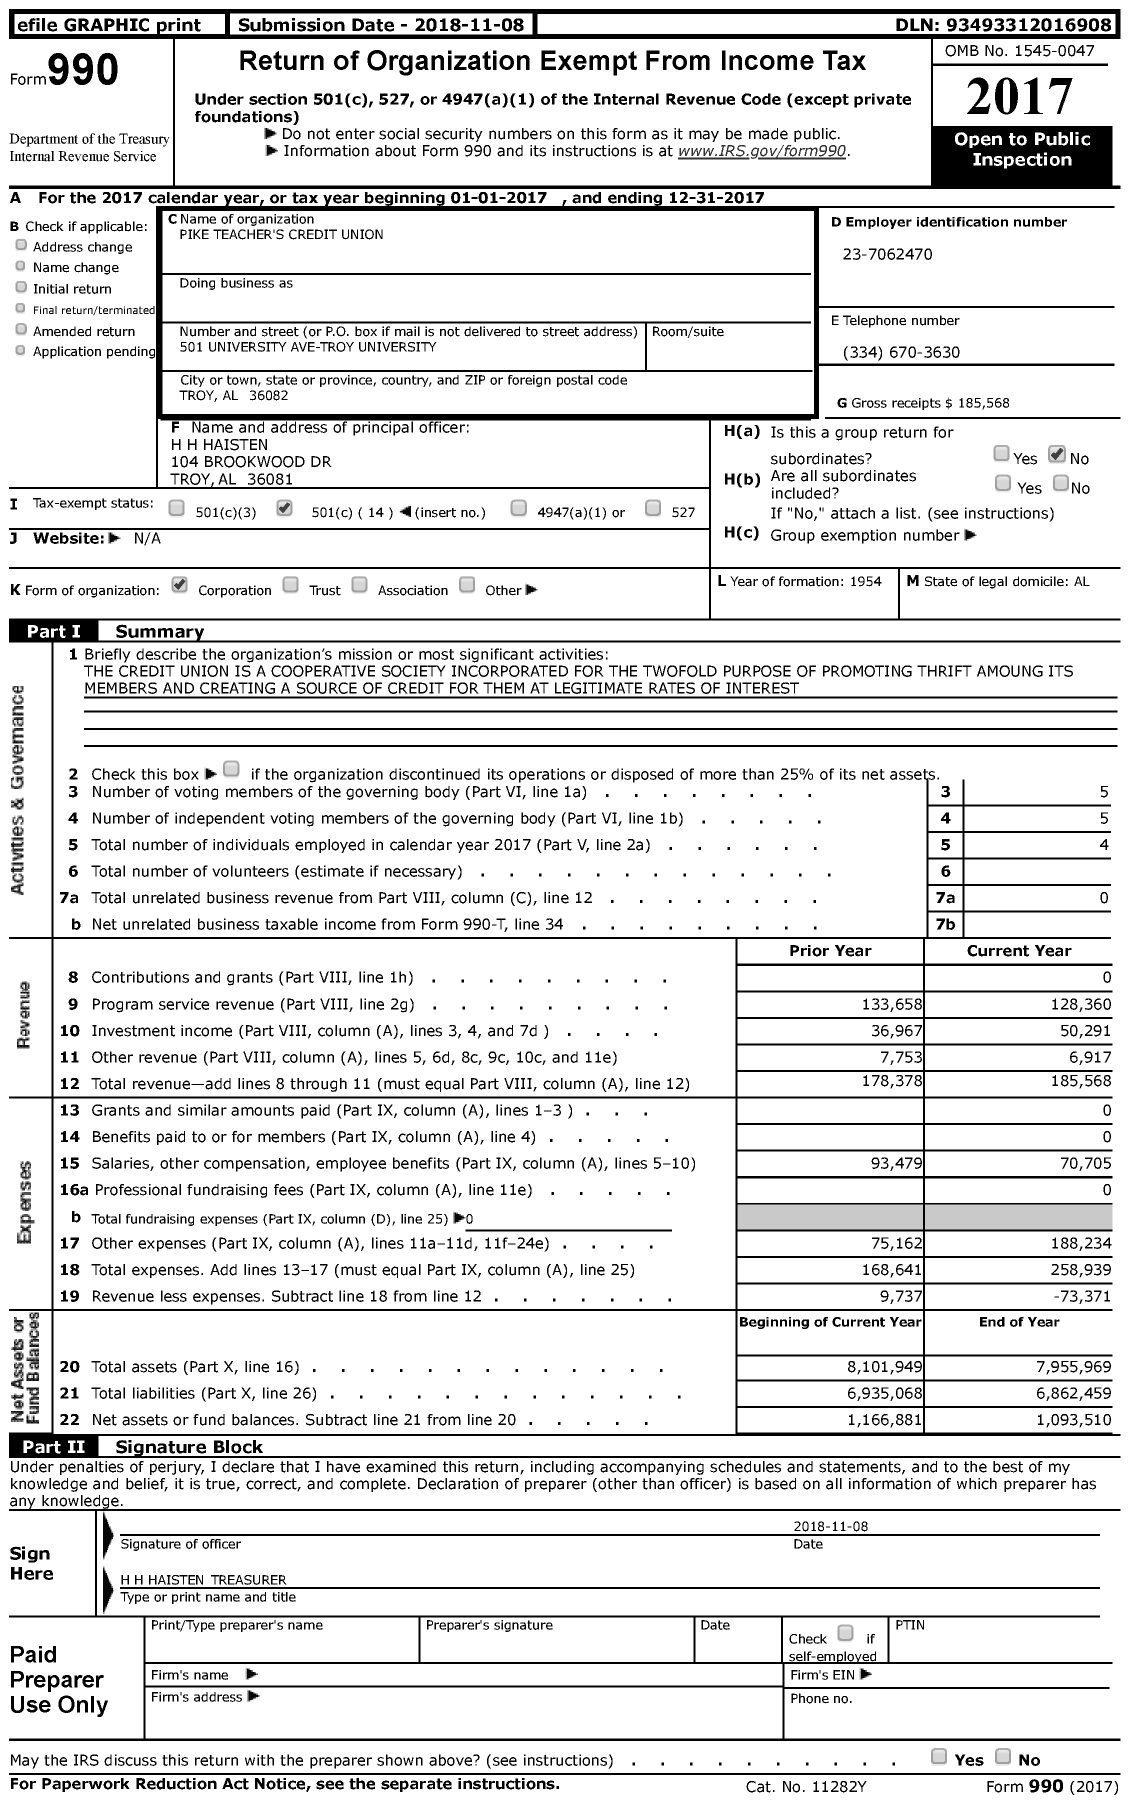 Image of first page of 2017 Form 990 for Pike Teacher's Credit Union